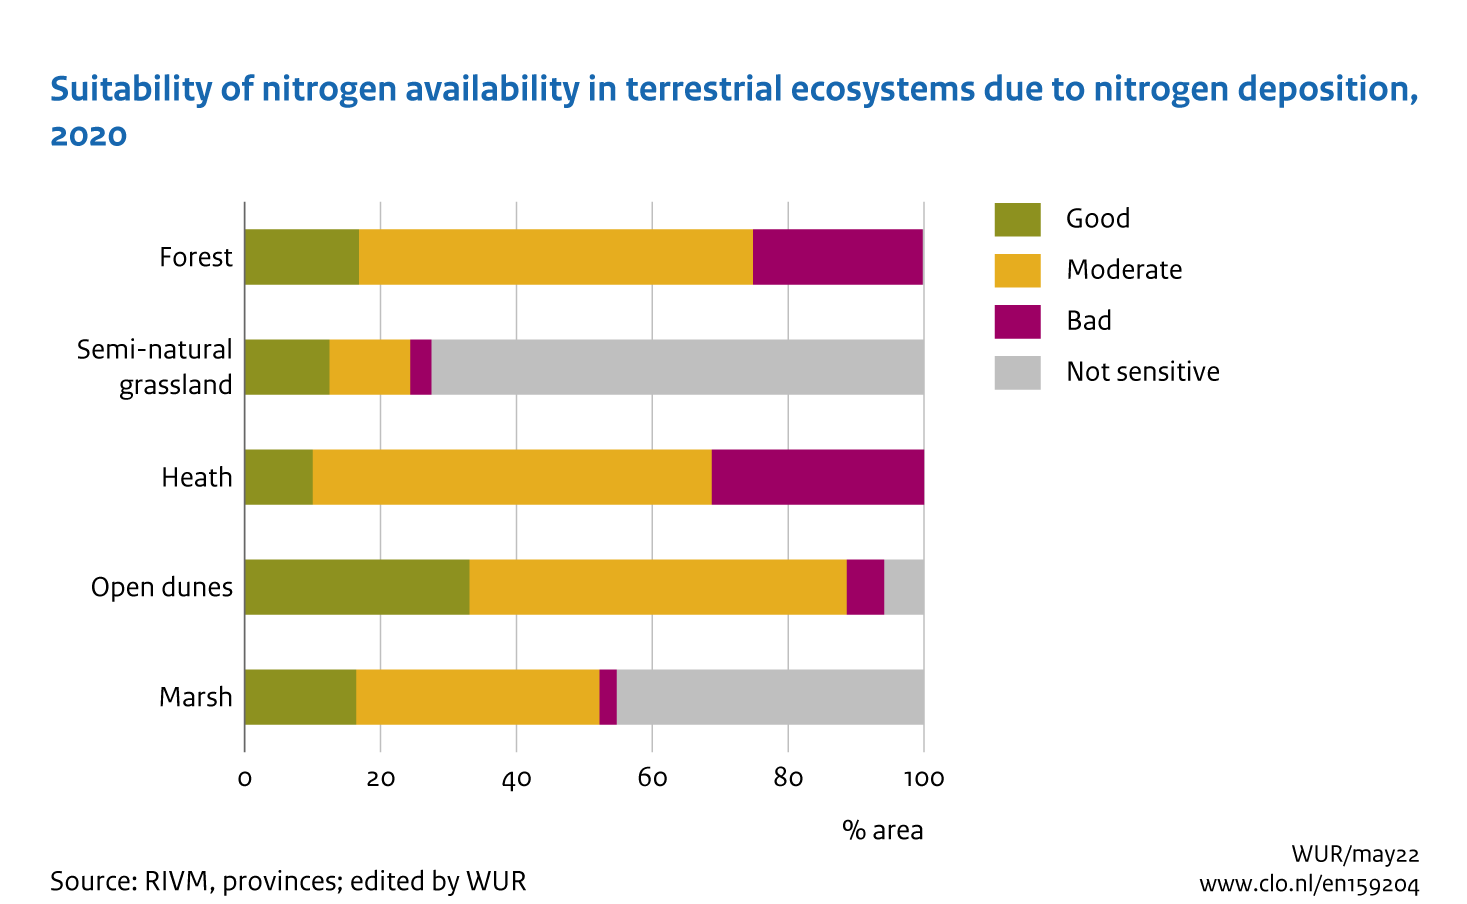 Image Suitability of nitrogen availability in terrestrial ecosystems due to nitrogen deposition, 2020. The image is further explained in the text.